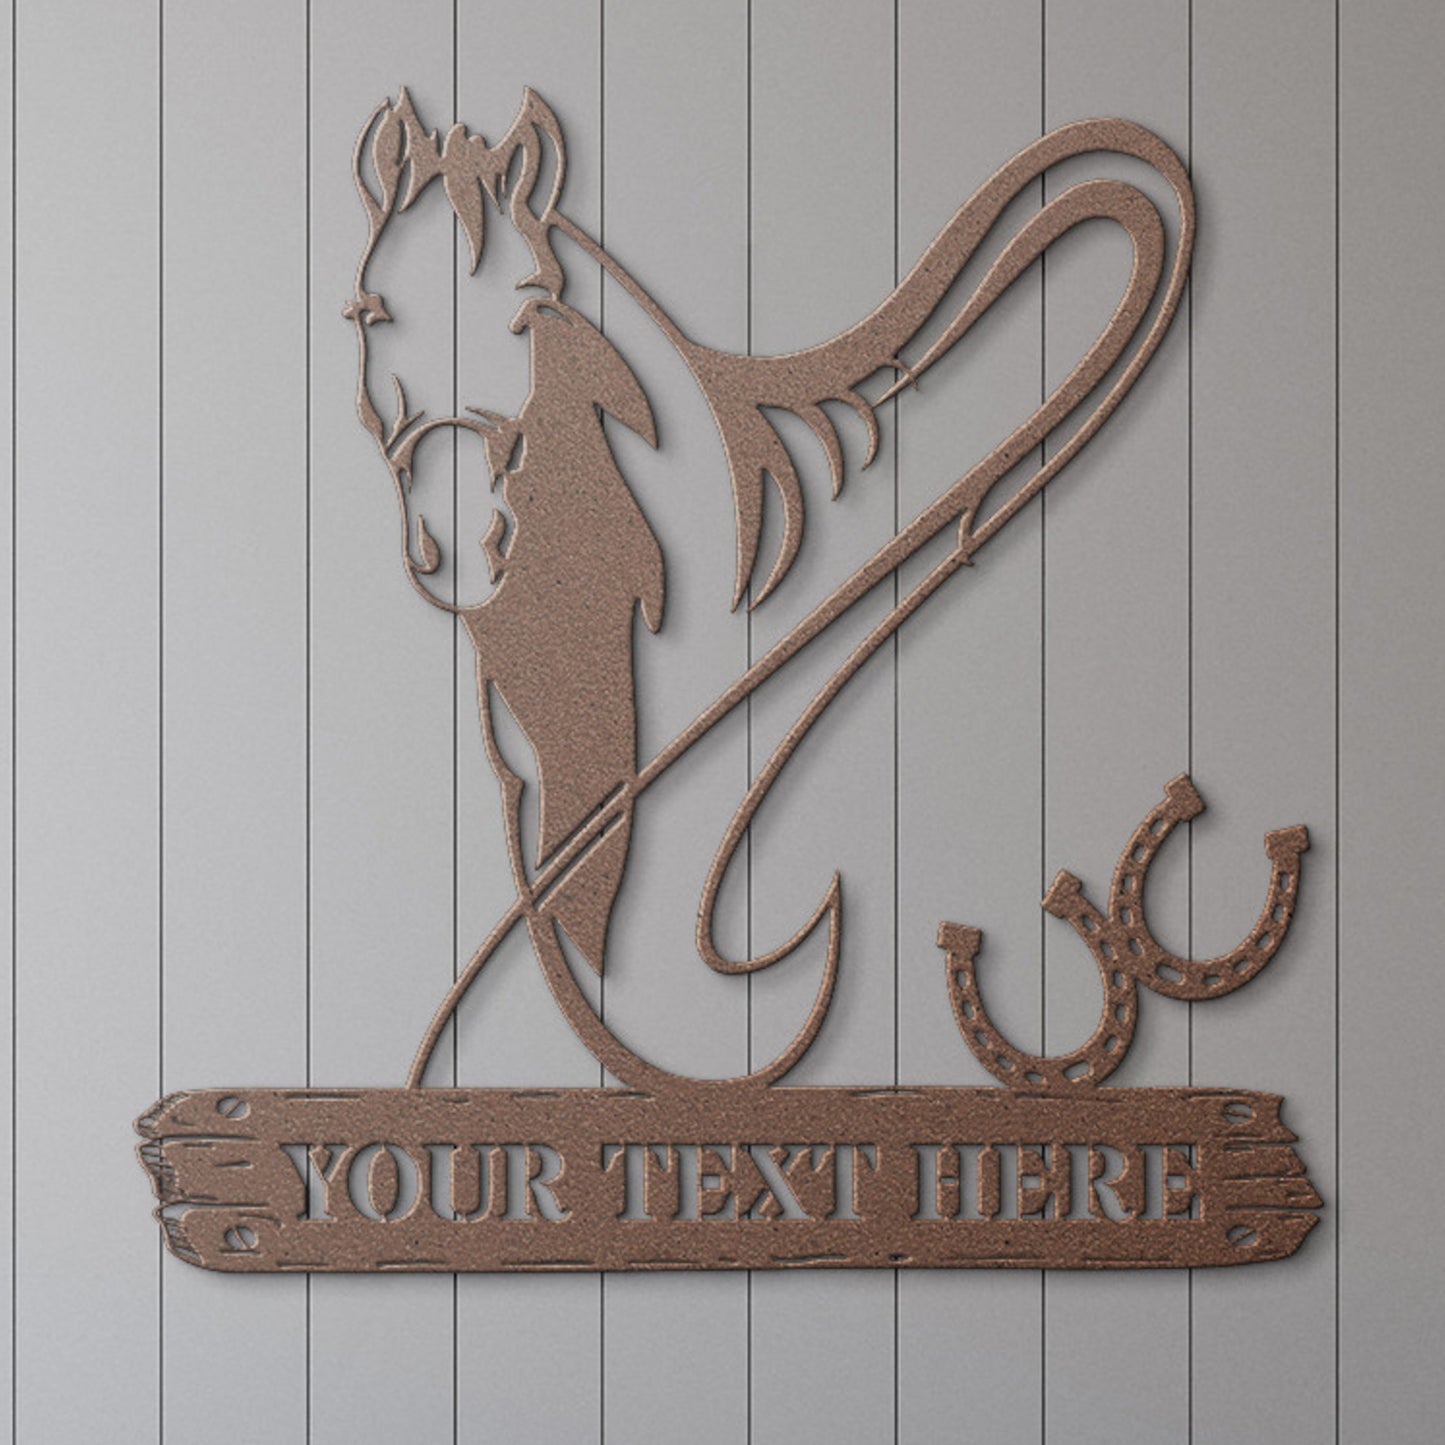 Personalized Horse Heart Name Metal Sign. Custom Horse Lover Decor Gift.  Horse Portrait With Custom Text. Personal Horse Rider Display Gift